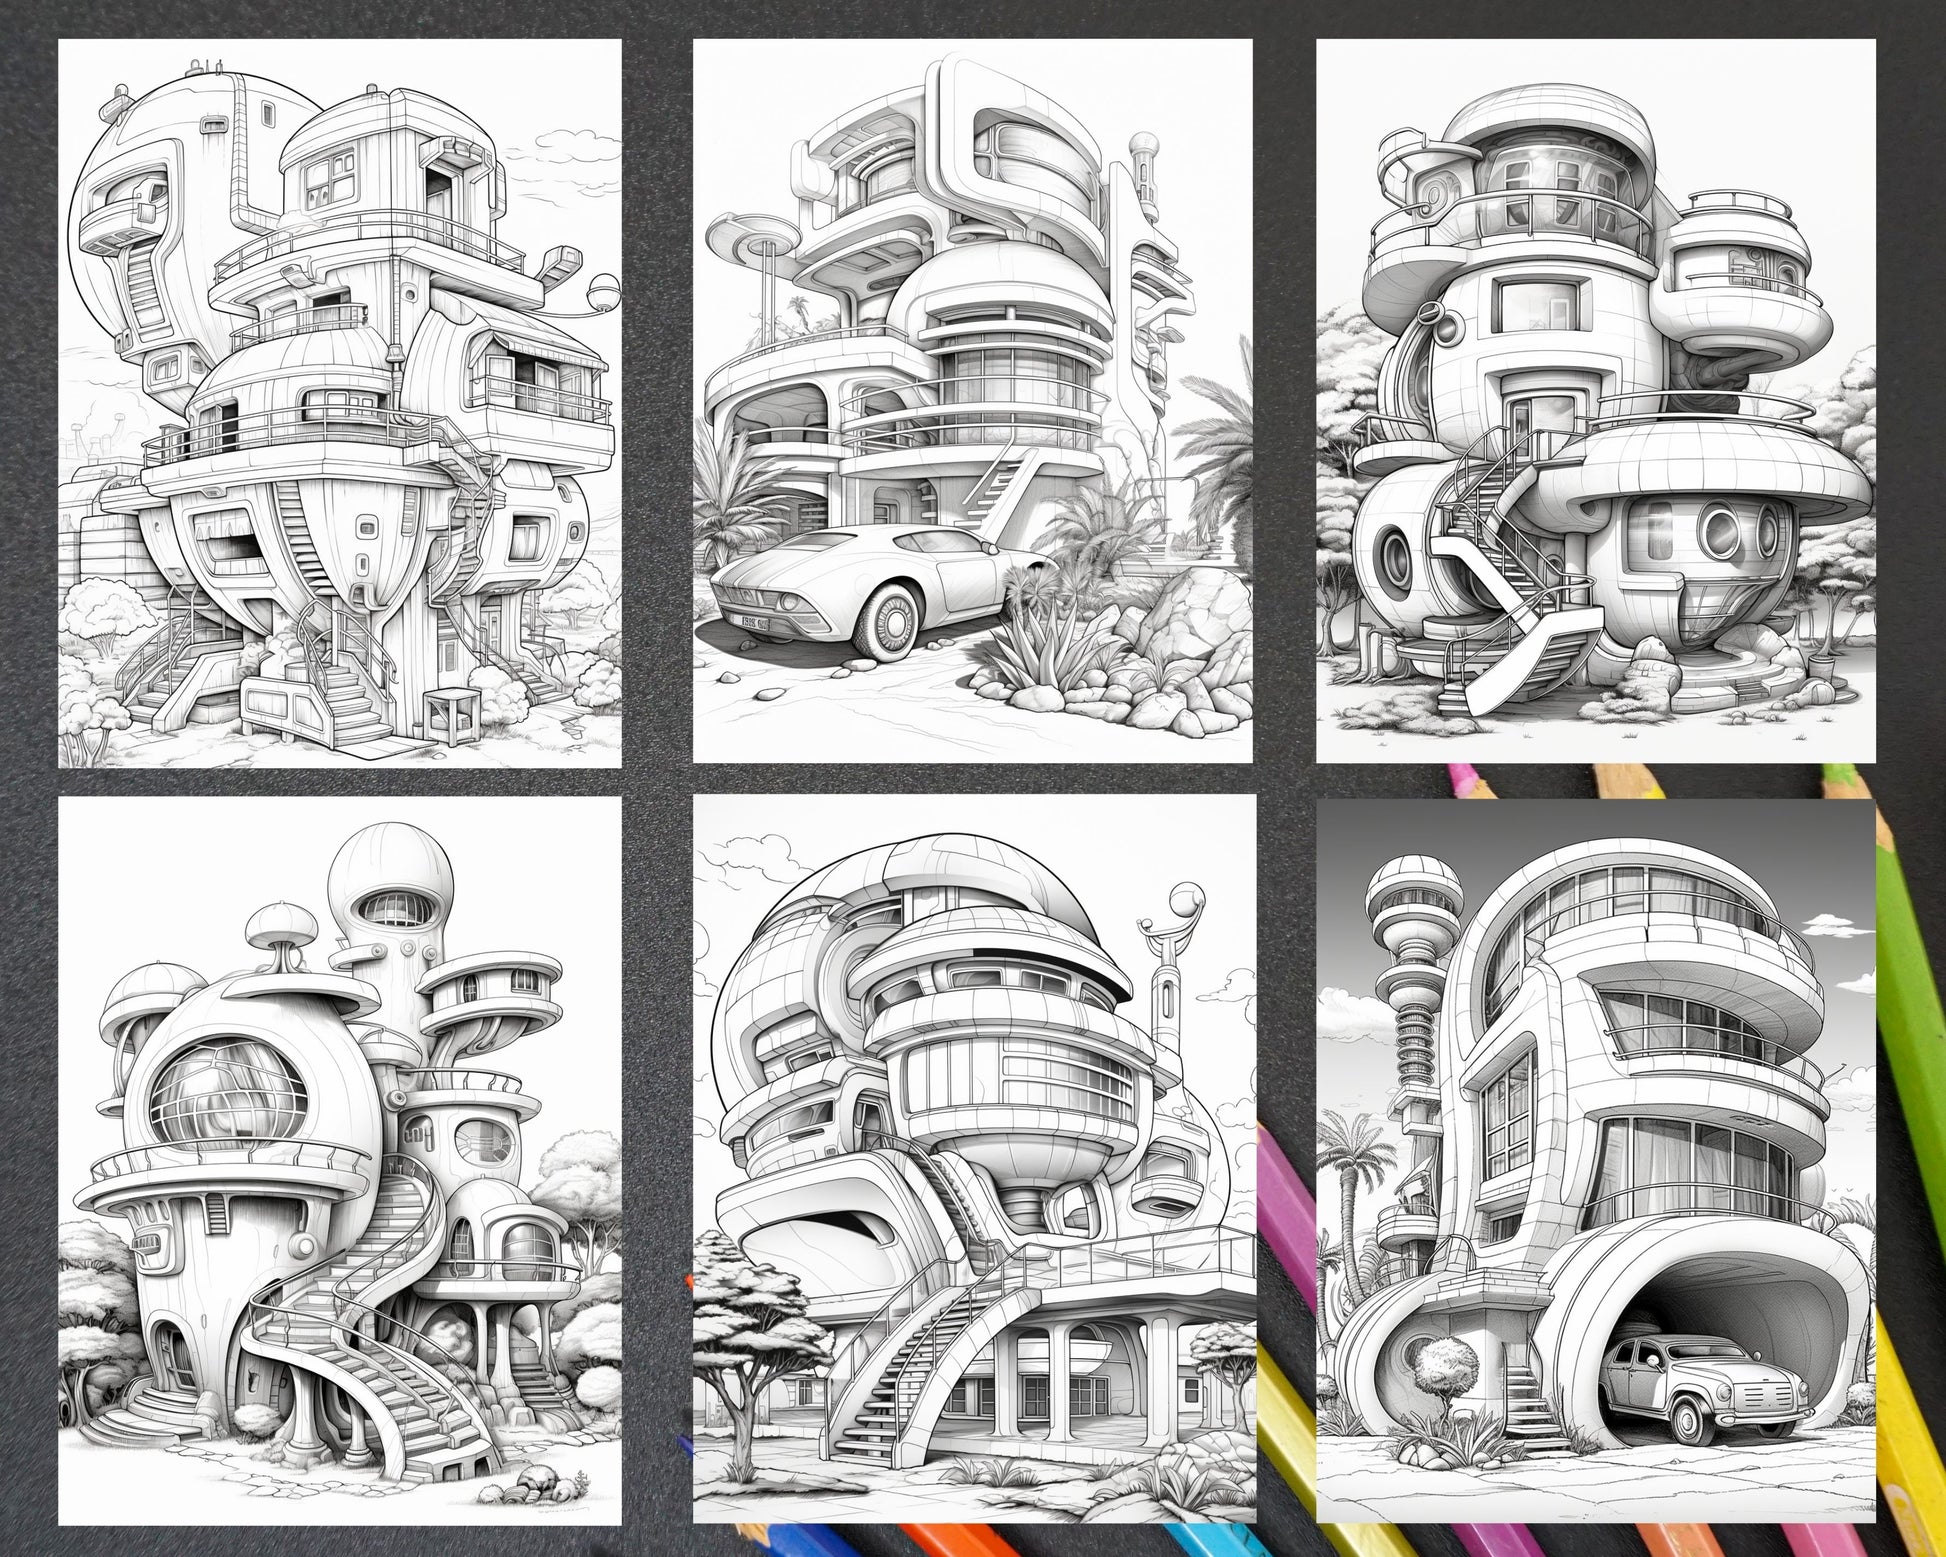 Futuristic Houses Coloring Pages, Printable Adult Coloring, Sci-Fi Architecture Coloring Pages, Urban Future Scenes Coloring Pages, Architecture Coloring Pages